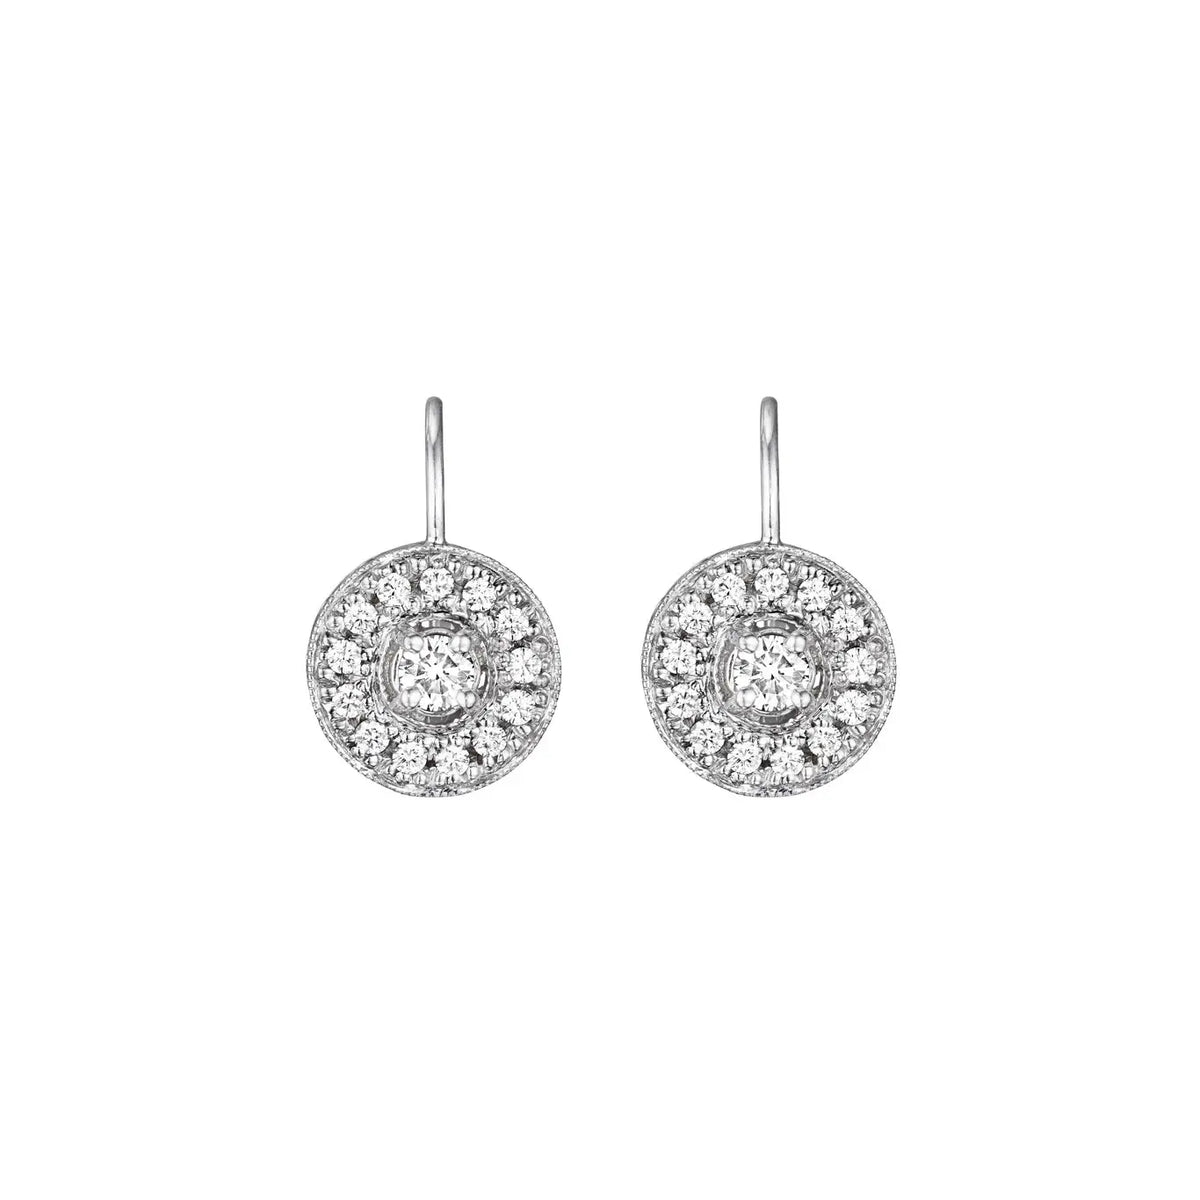 18 white gold with pave diamonds .69 cttw round with engraving studs  If an item is out of stock, please allow 4-6 weeks for delivery.  Designed by Penny Preville